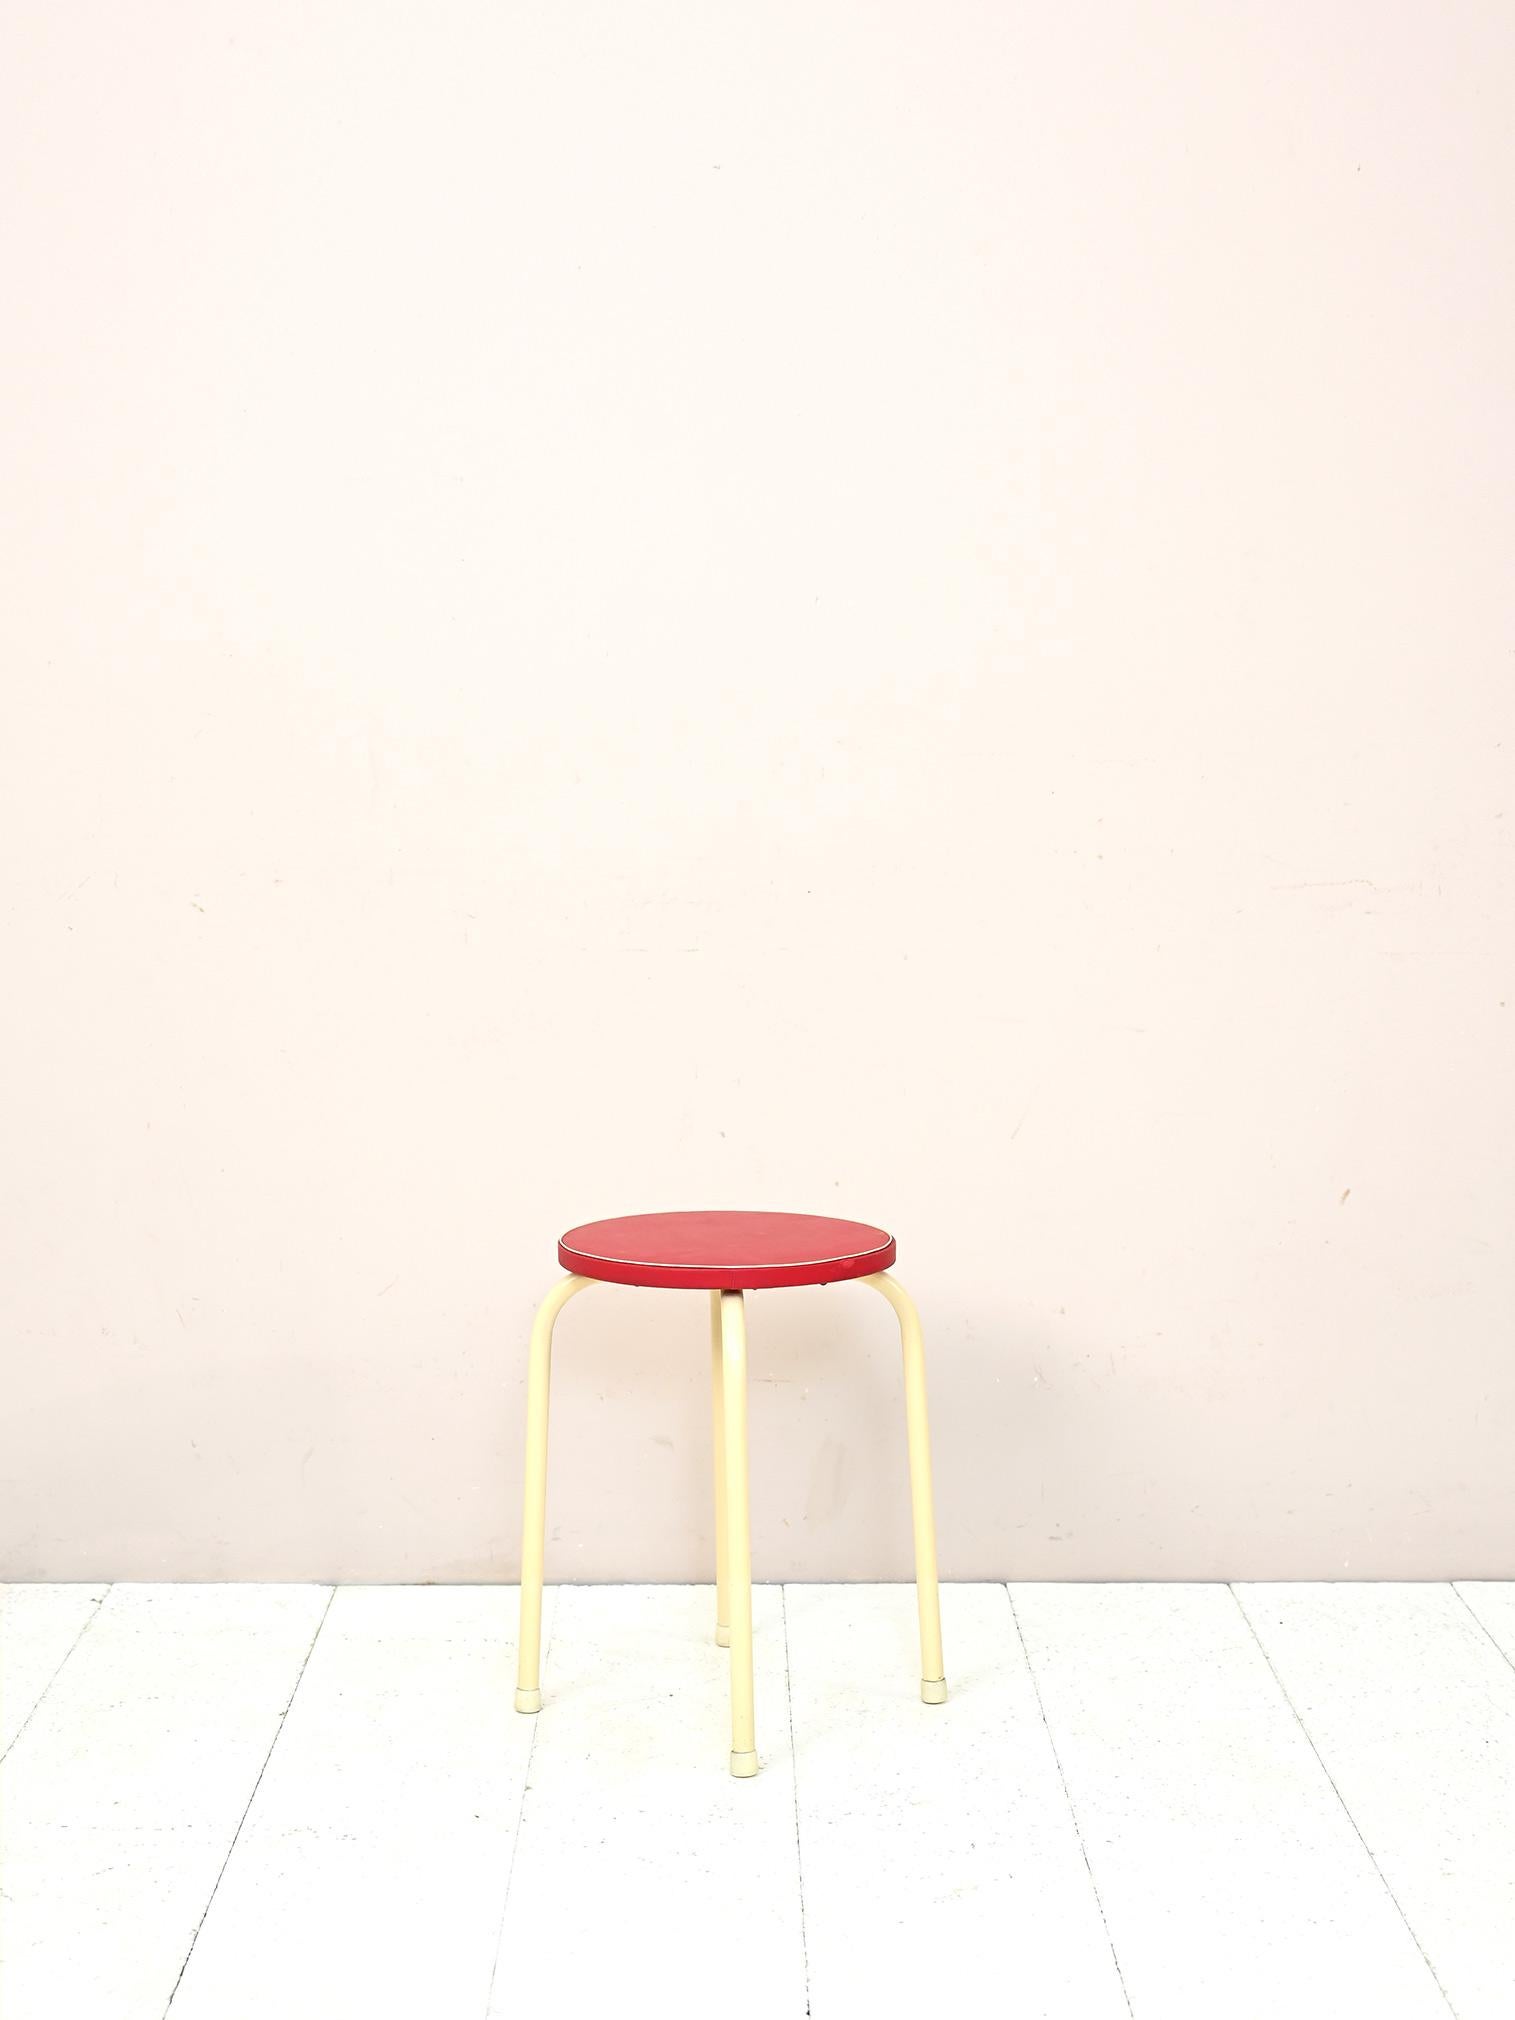 1960s Scandinavian stool.

Consists of a tubular metal support frame painted white and an upholstered seat covered in red leatherette.
A retro-flavored piece of furniture to be used either as a seat or as a small table top.

Good condition. May